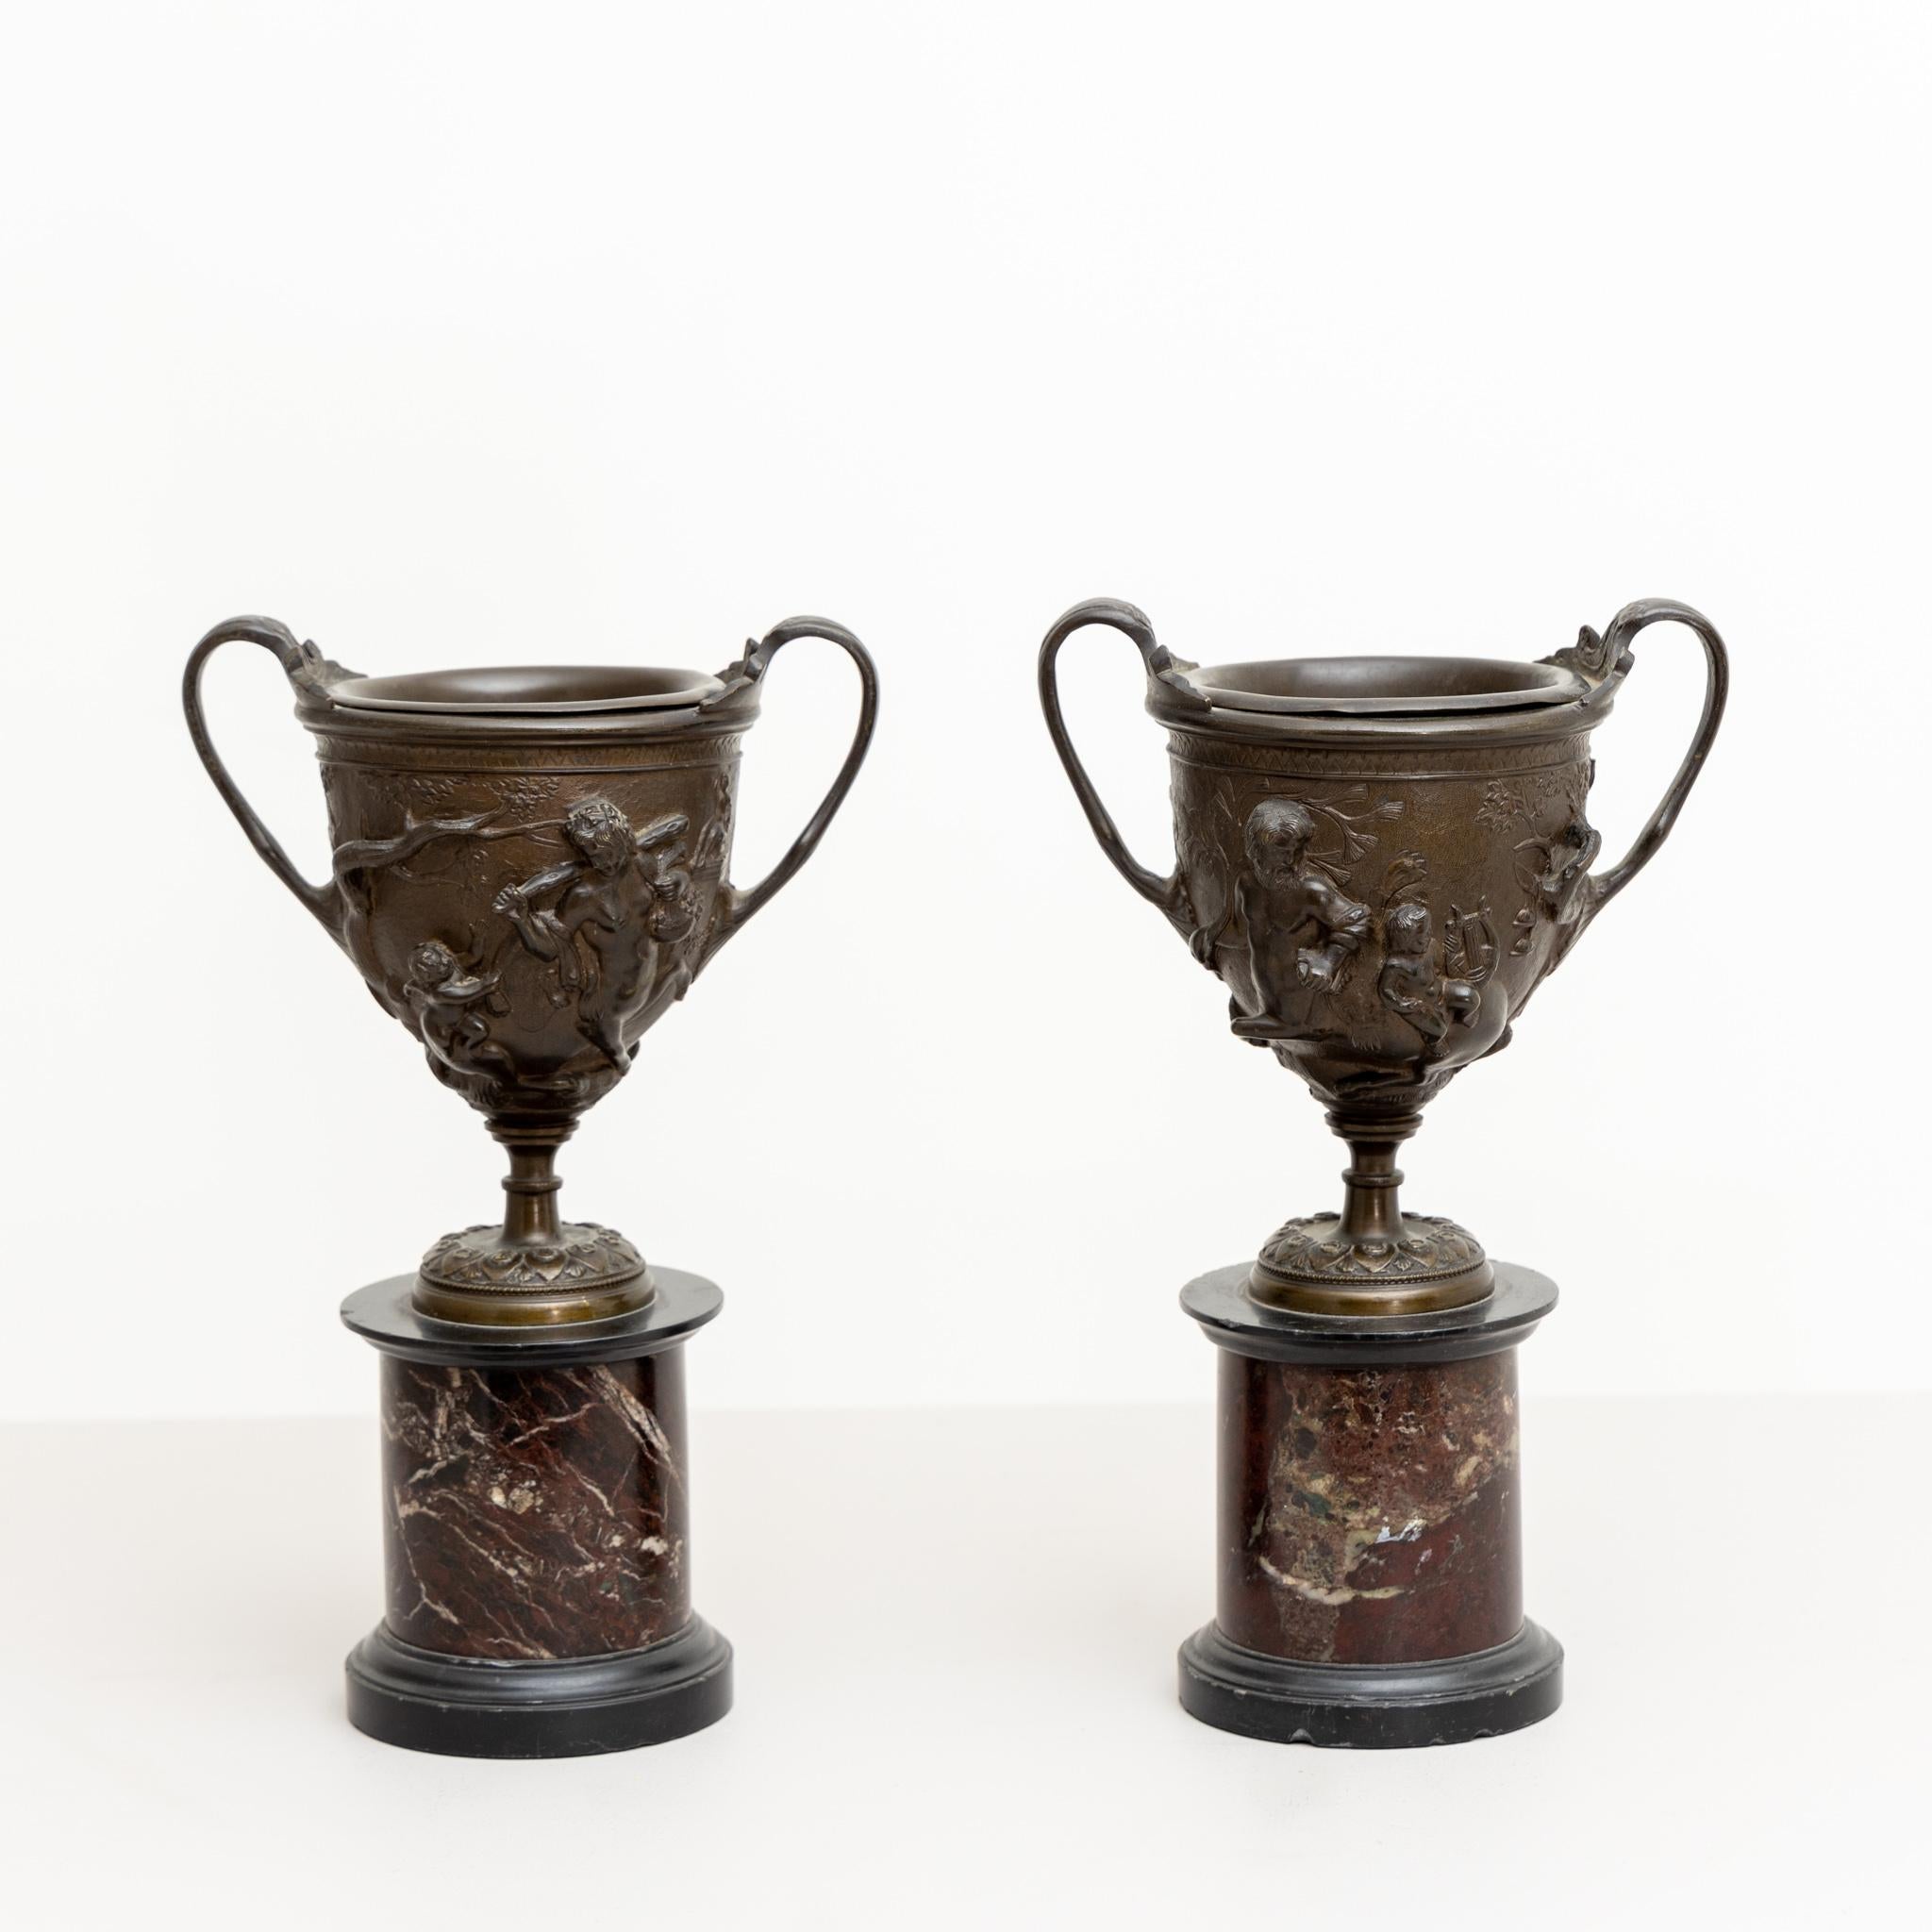 Pair of bronze tazzas on round marble bases with relief depiction of satyrs and heroes on the wall. After a Pompeian original.